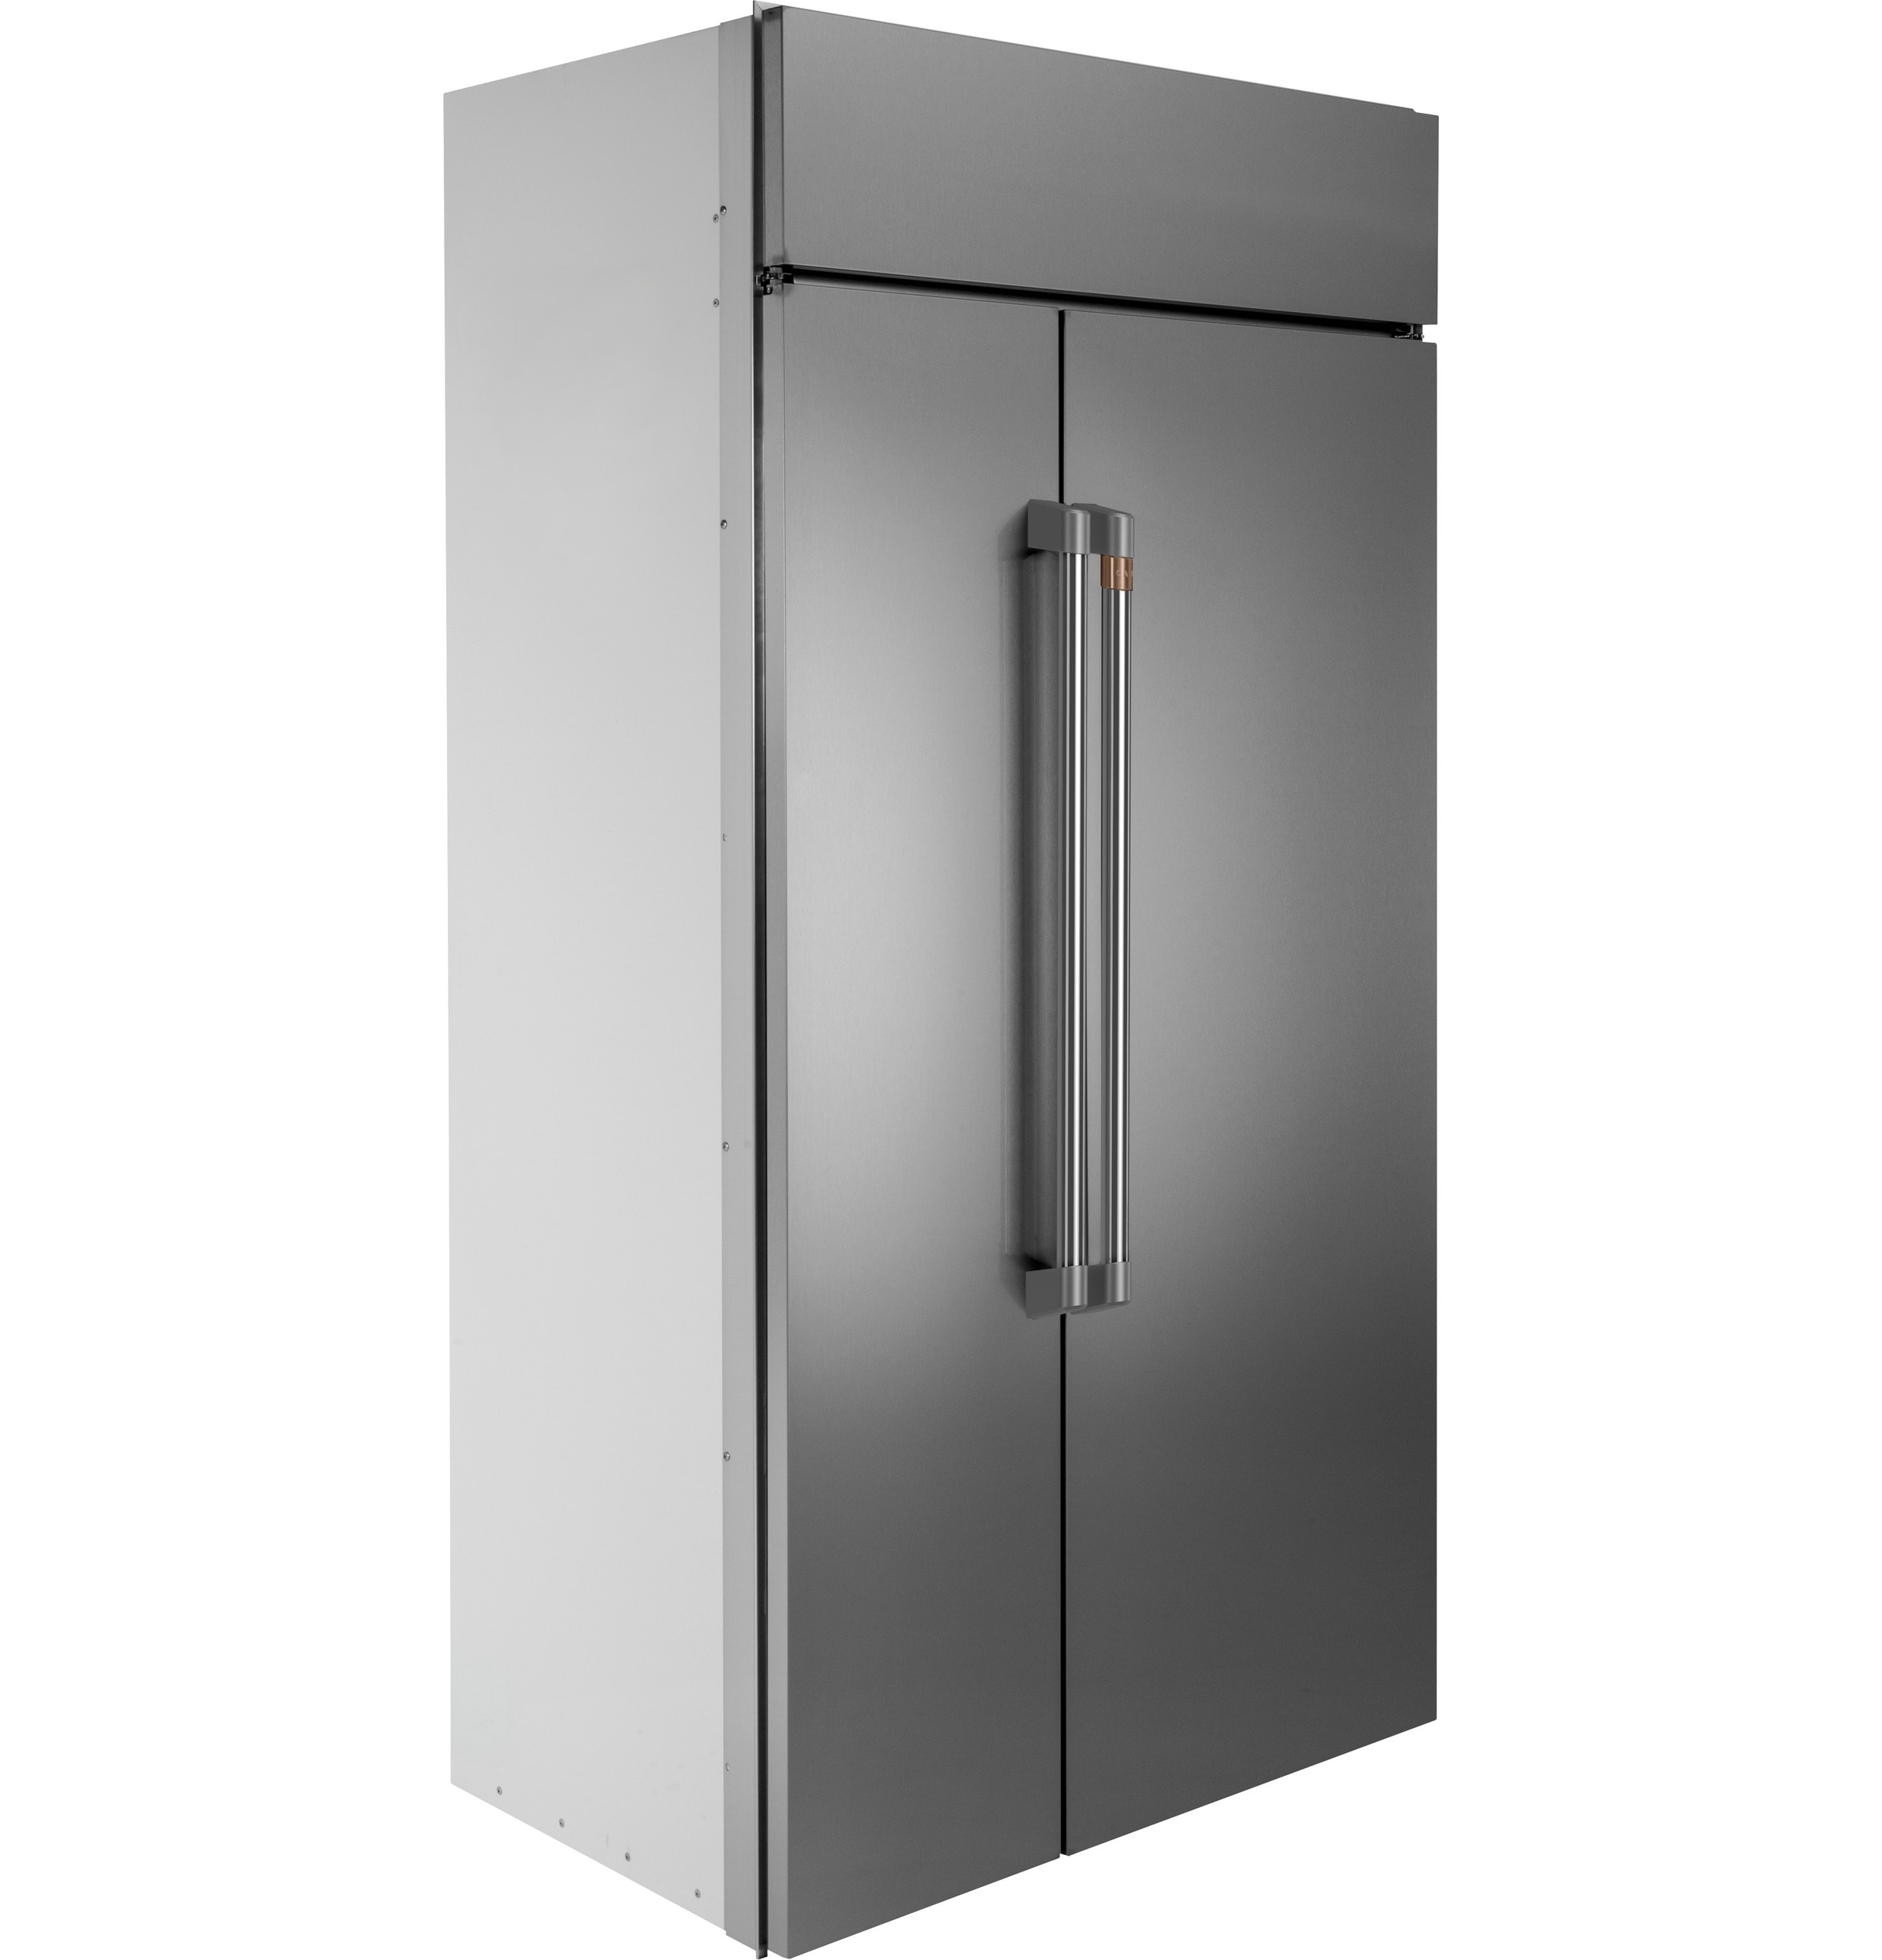 ICEJUNGLE Stainless Steel Refrigerator, 5.30 Cu.Ft Full Size Fridge, 175  Cans Refrigerator with Built-in Design and IPX4 Waterproof, Premium  Stainless